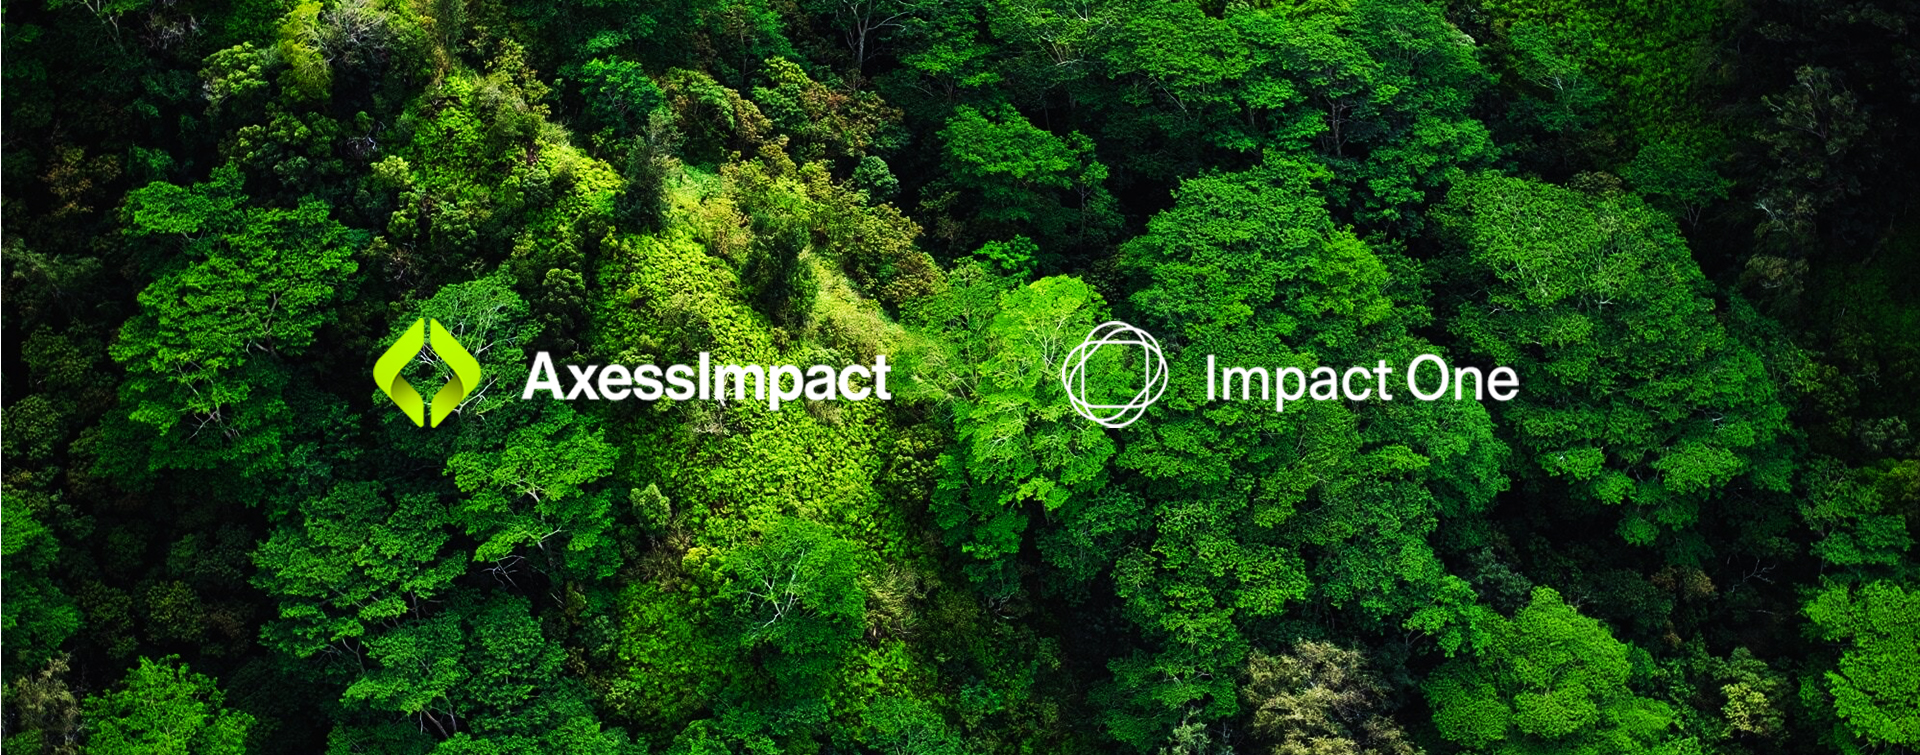 AxessImpact and Impact One forge strategic partnership to develop nature-positive solutions